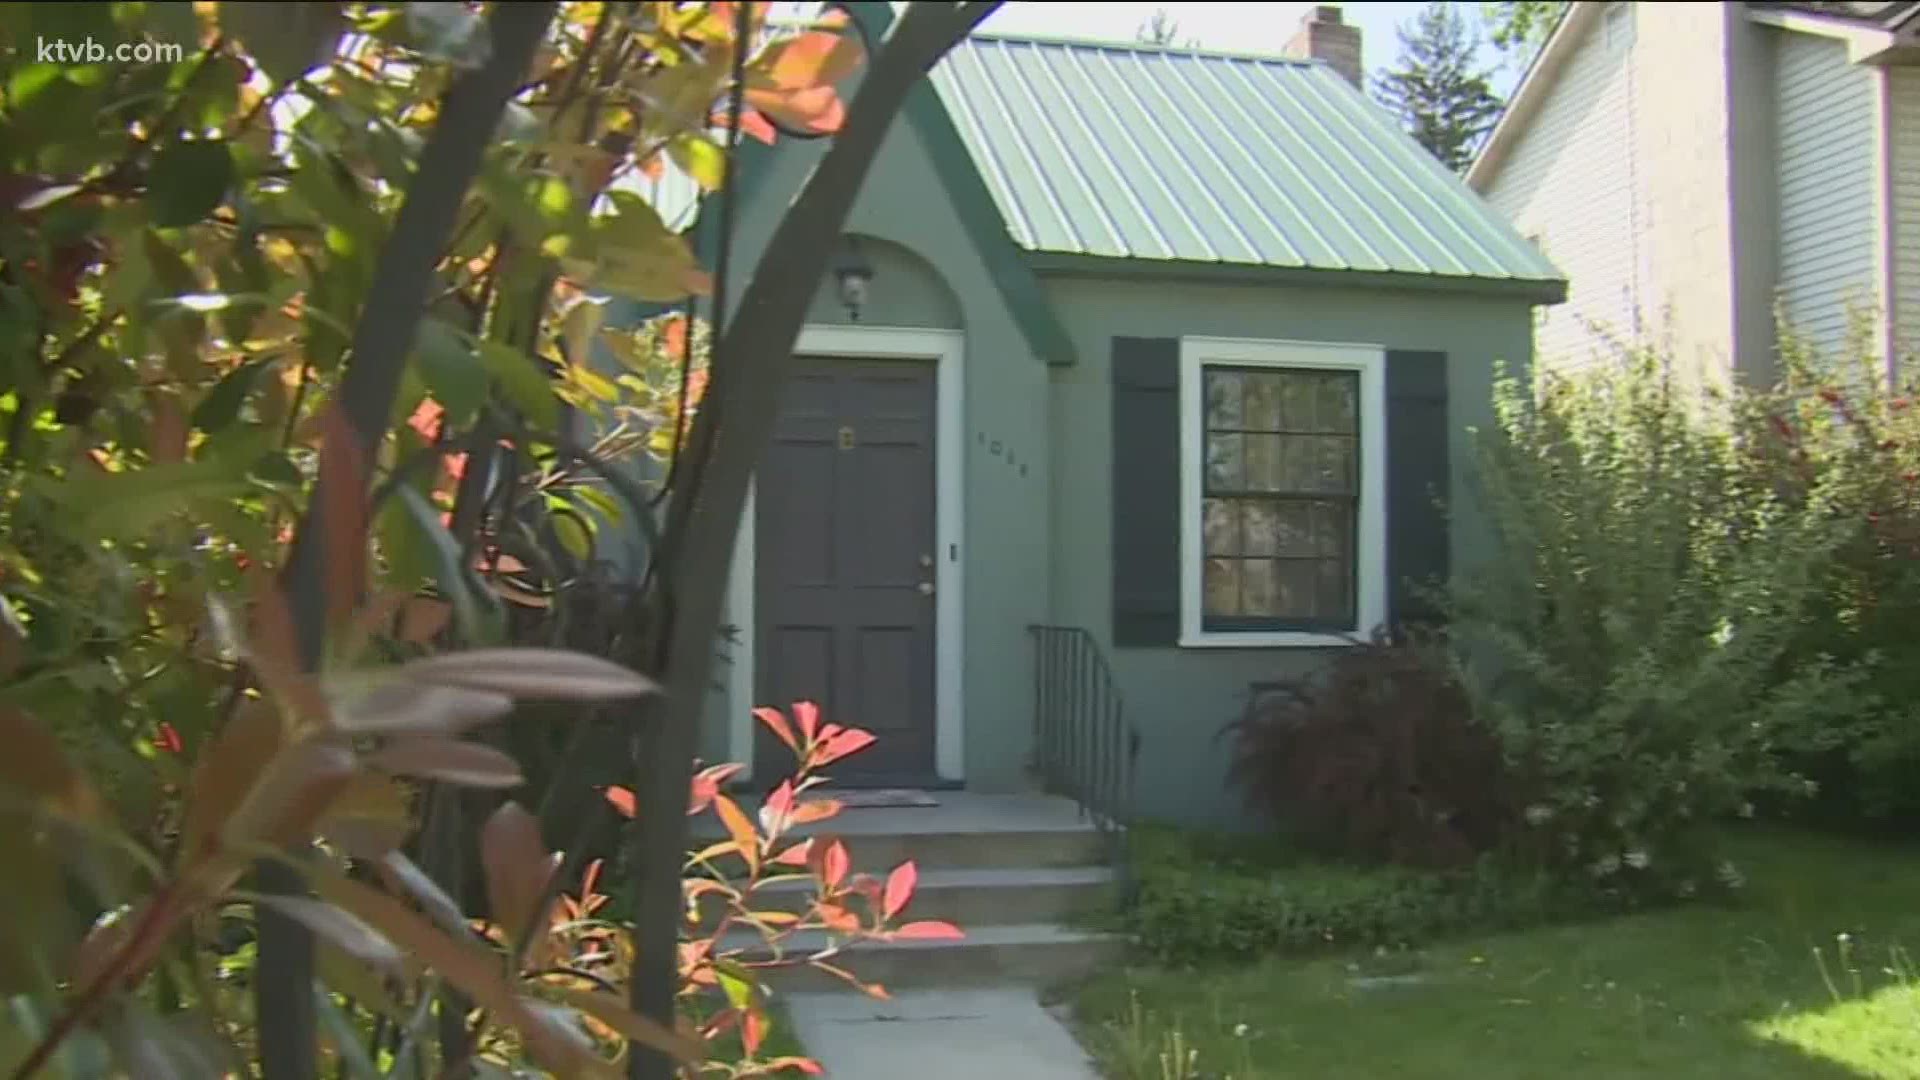 “If you are experiencing housing insecurity, or trouble paying your rent, I would encourage you to reach out," a city housing official told KTVB.